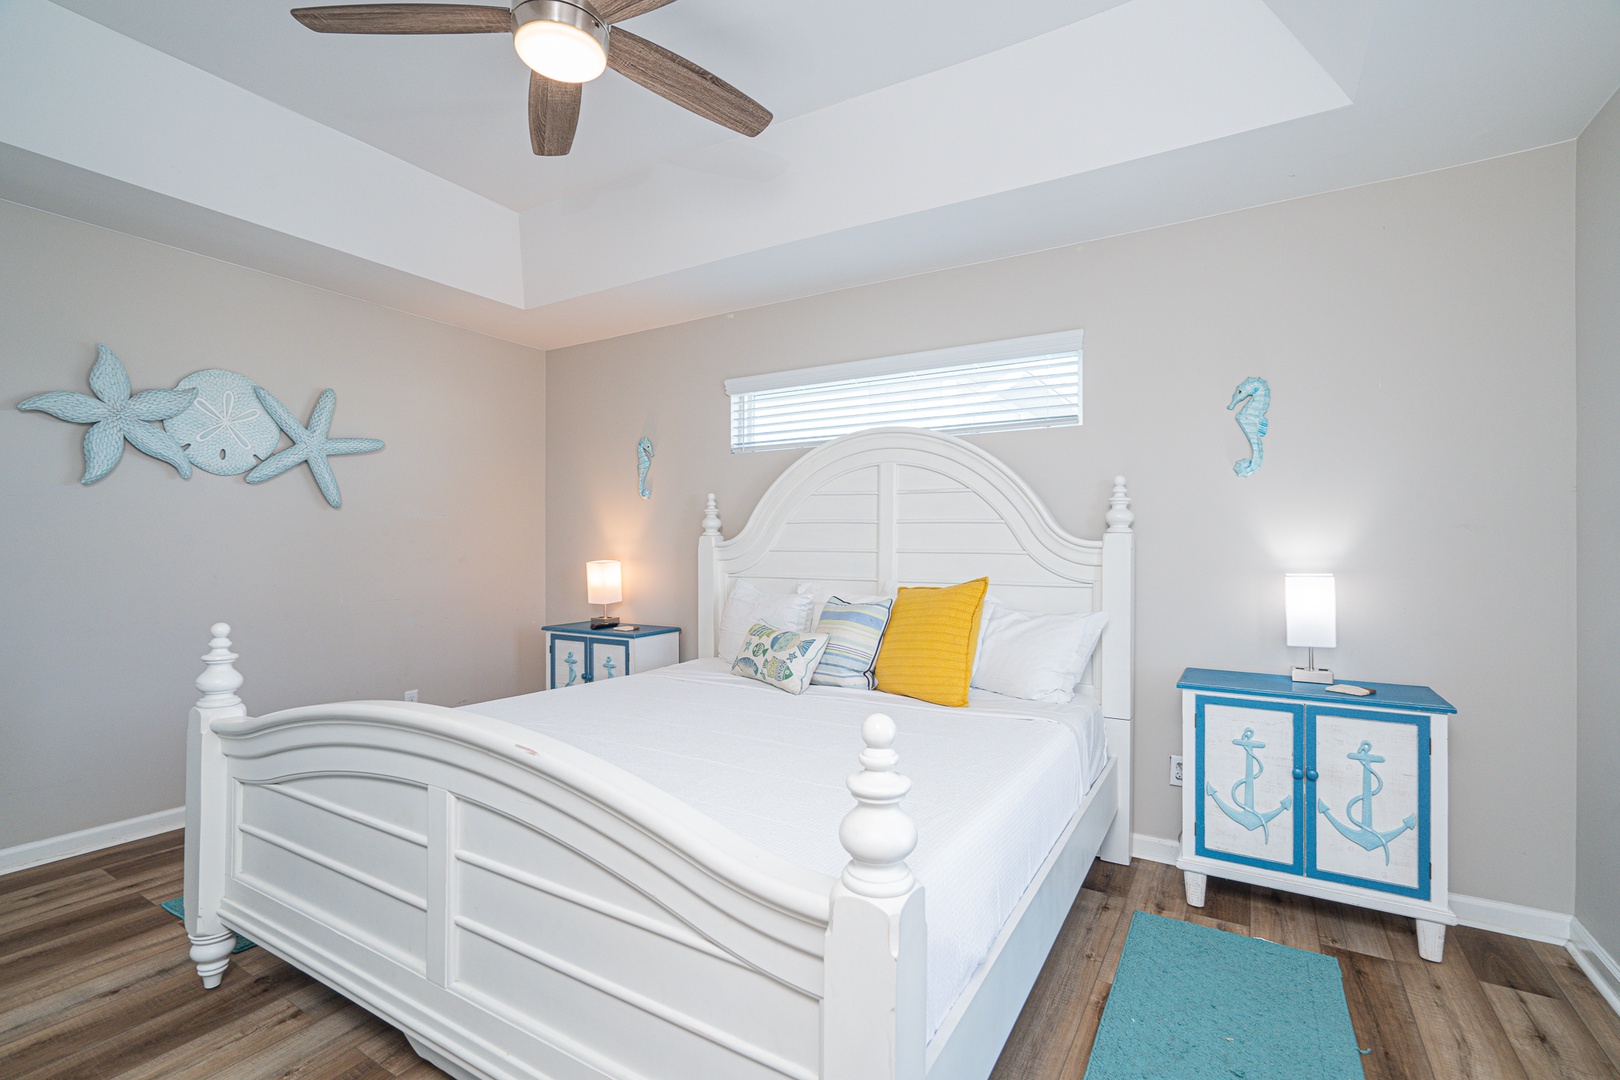 This 2nd floor king bedroom boasts a Smart TV, ceiling fan, & balcony access